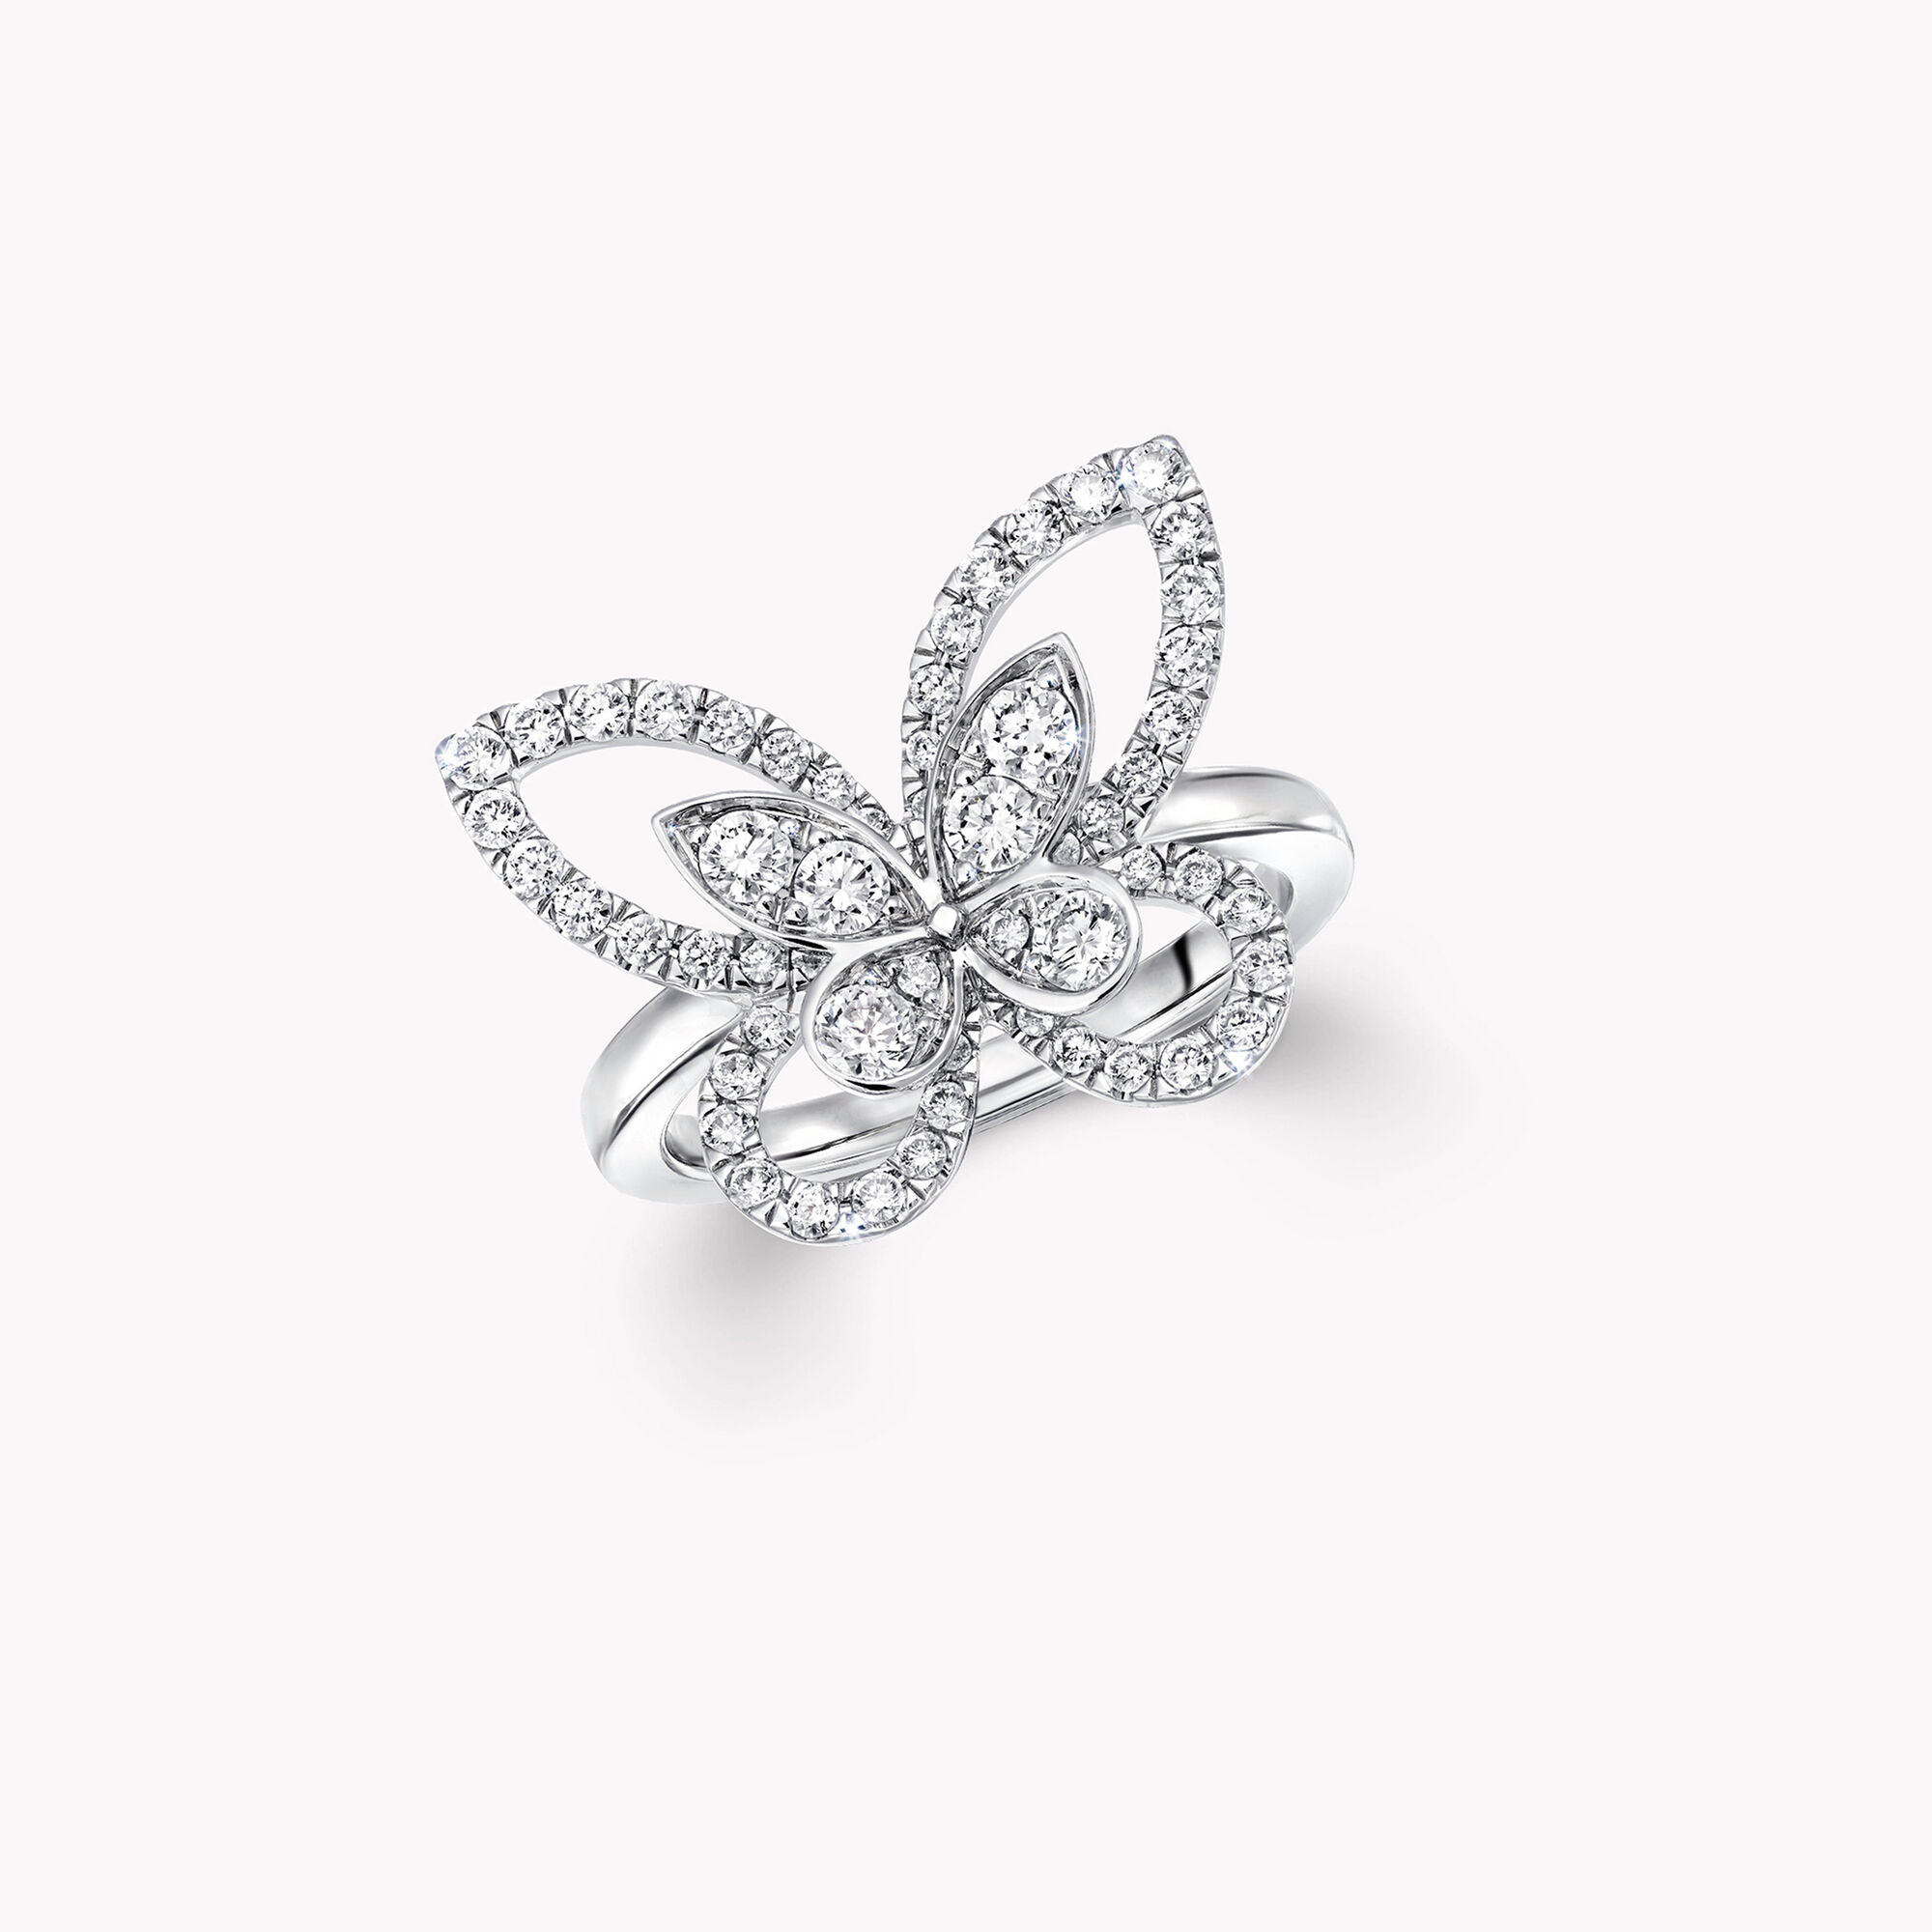 Butterfly Silhouette Diamond Ring, White Gold - Graff